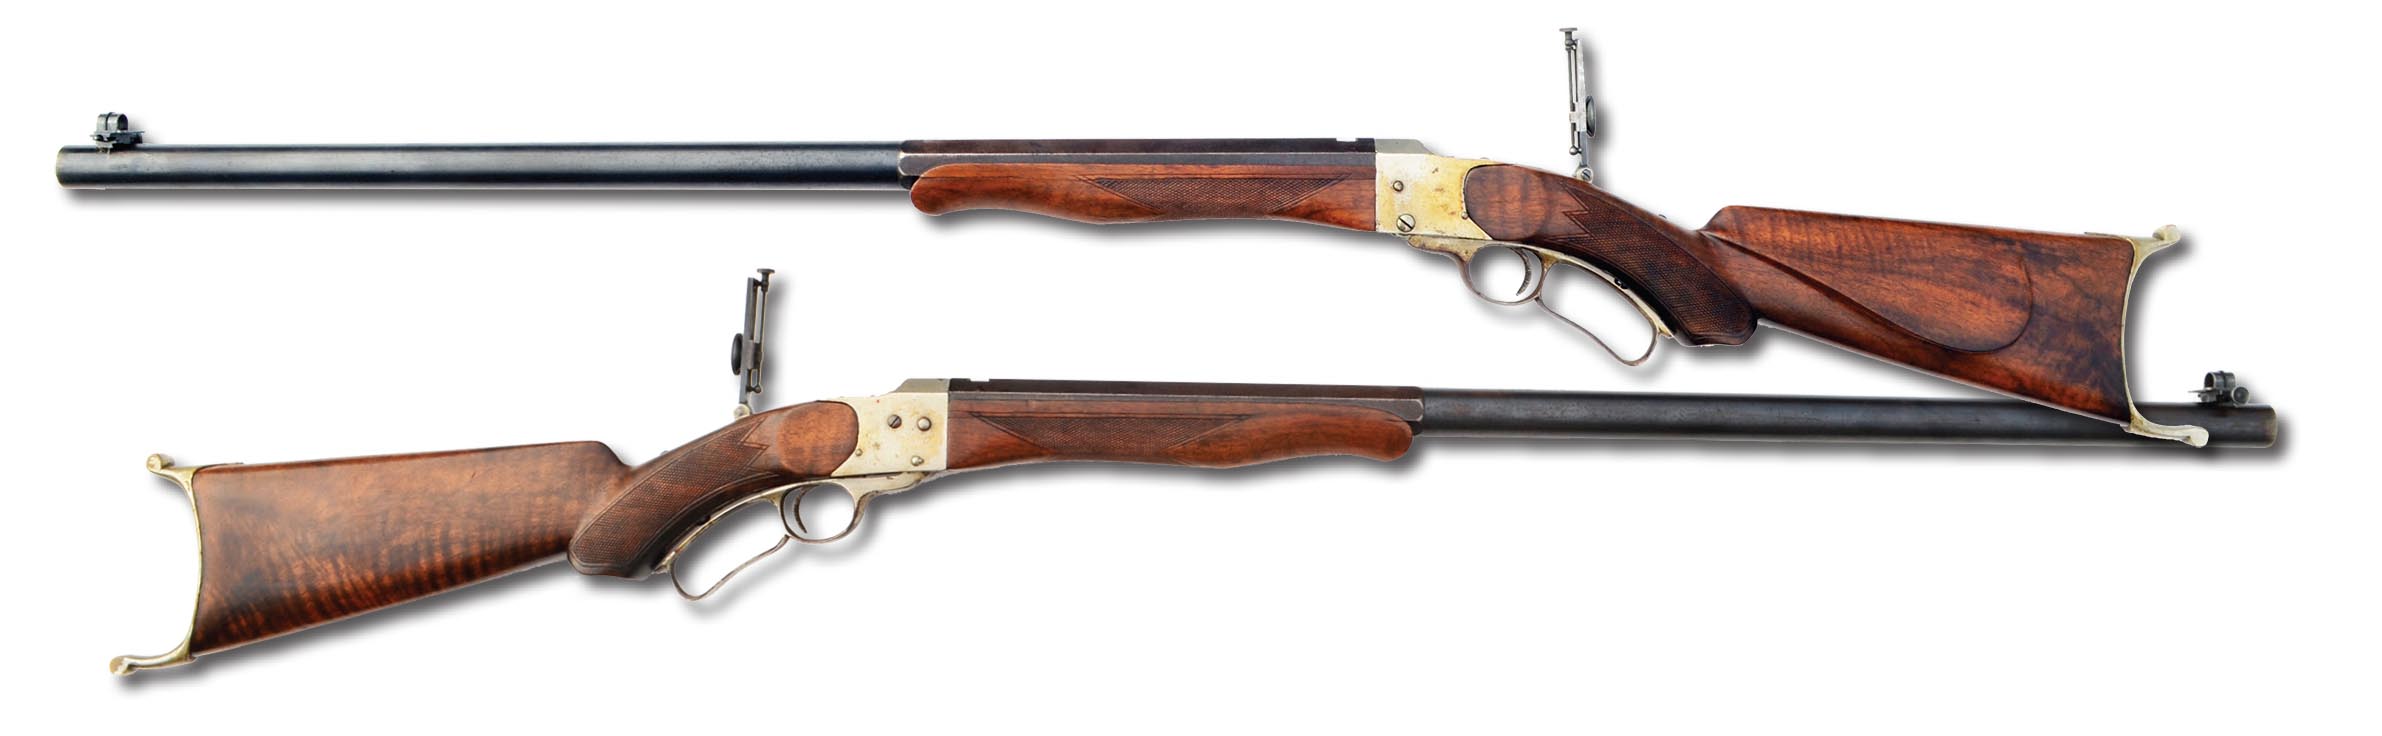 A “grade one” Farrow rifle. The “grade two” had plainer walnut and no checkering. The Farrow was one of the sleekest and most graceful of all the American single shots and deserves to be more widely known than it is.